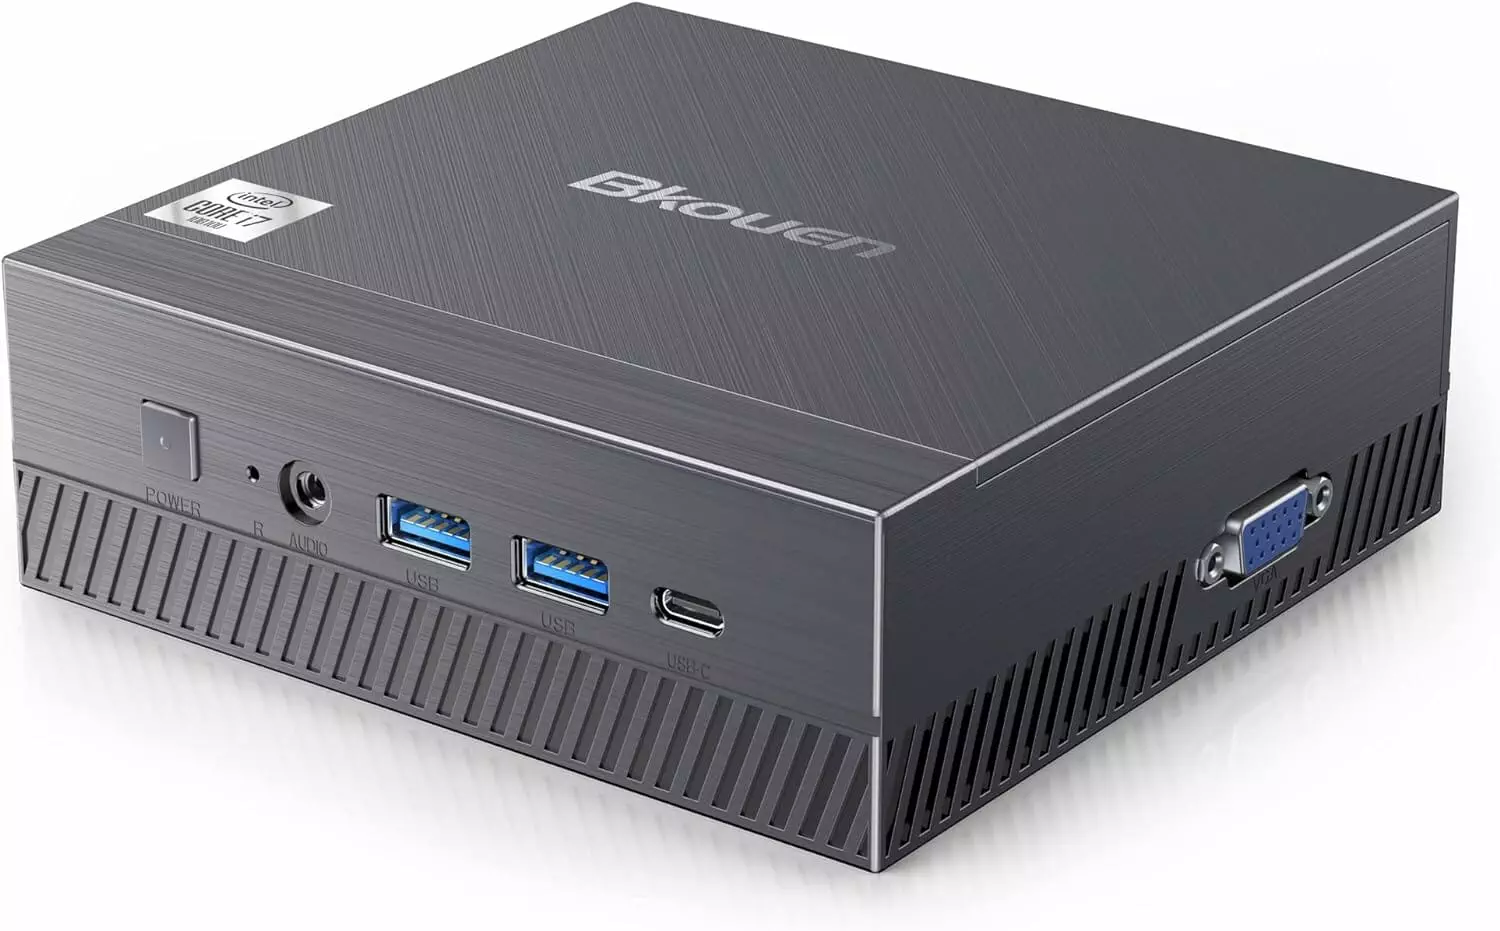 Bkouen Mini PC Intel I7-10810U (up to 4.9 GHz), Mini Computers Windows 11 Pro for Gaming, 6 Cores 12 Threads, 16GB DDR4 512GB M.2 SSD, 2.5 Inch SATA, WiFi 6, BT5.2 for Business, Study